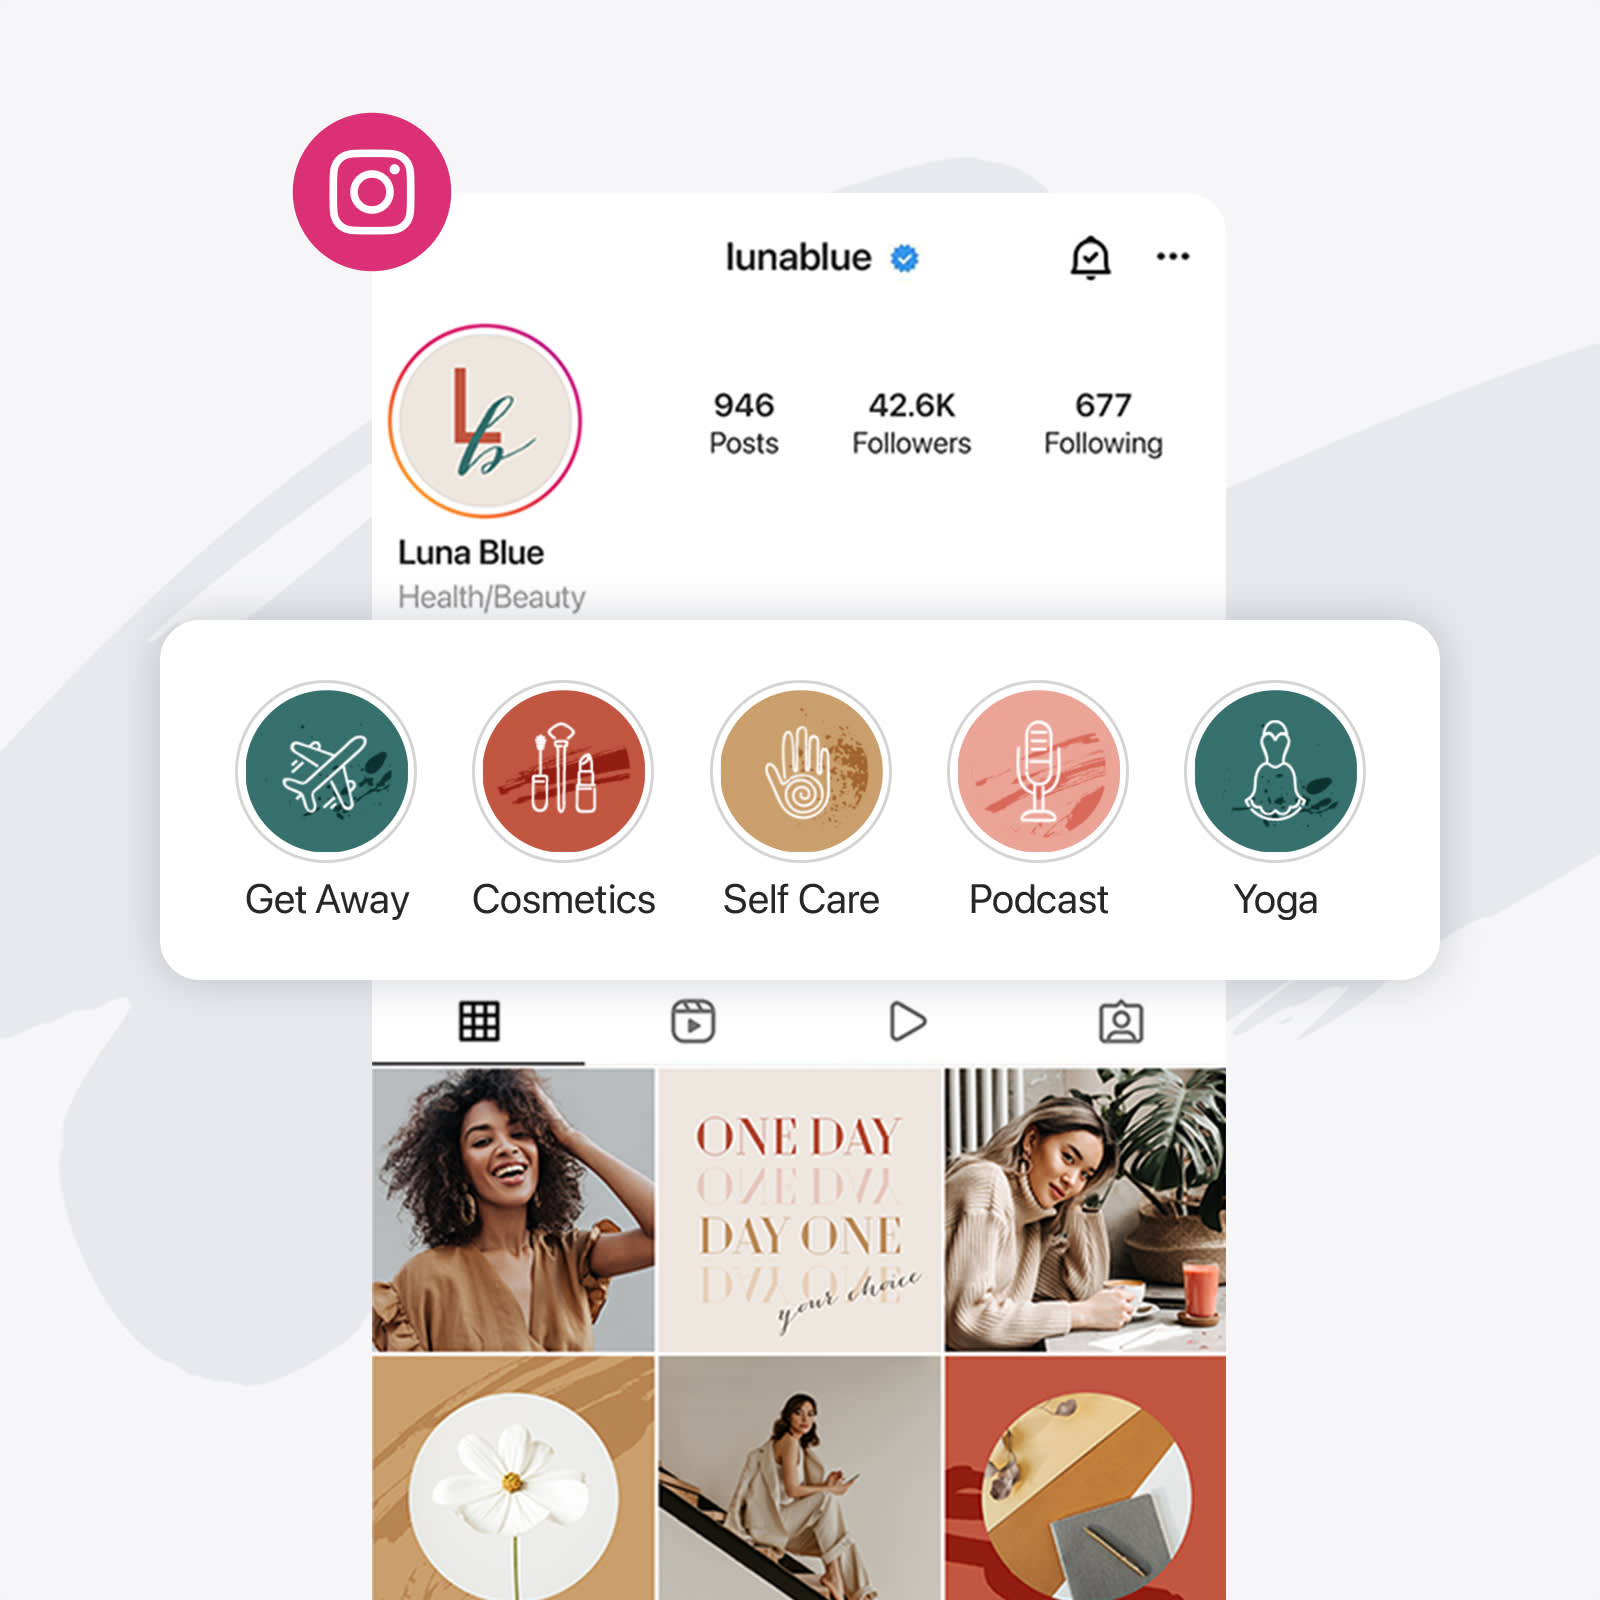 Instagram feed with highlight cover examples like "Get away," "Cosmetics," "Self-care," "Podcast," and "Yoga."